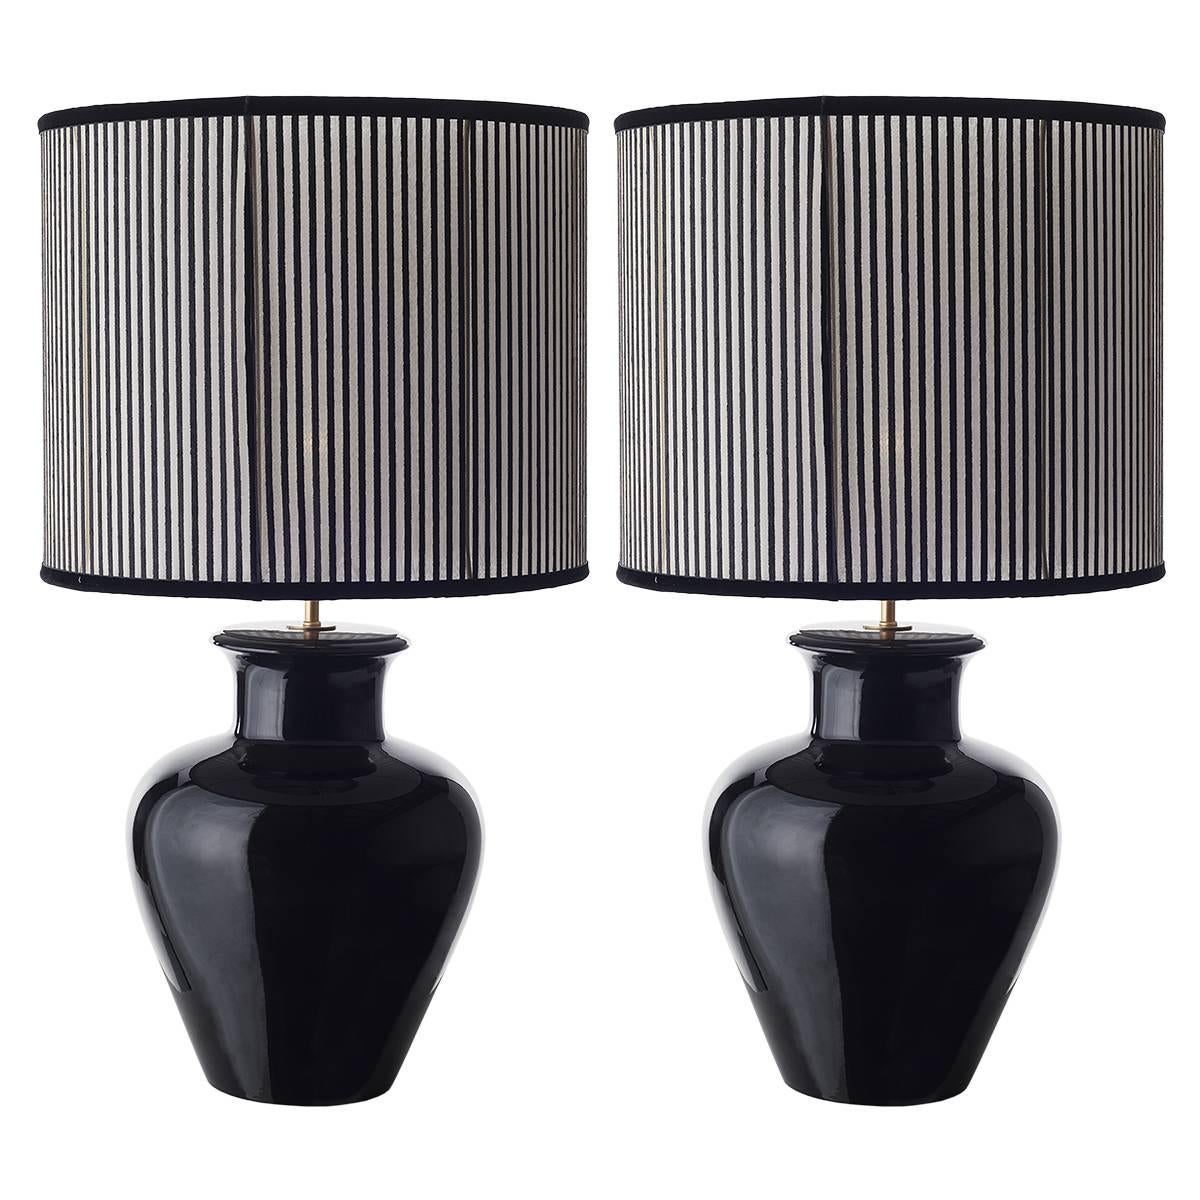 Pair of shapely ceramic table lamps and shades.
The perfect attractively shaped body of this table lamp is emphasized by the glossy black glaze and the seductive but geometric, fancy fabric the shade is made of.
Wired to your request, one E27/E26